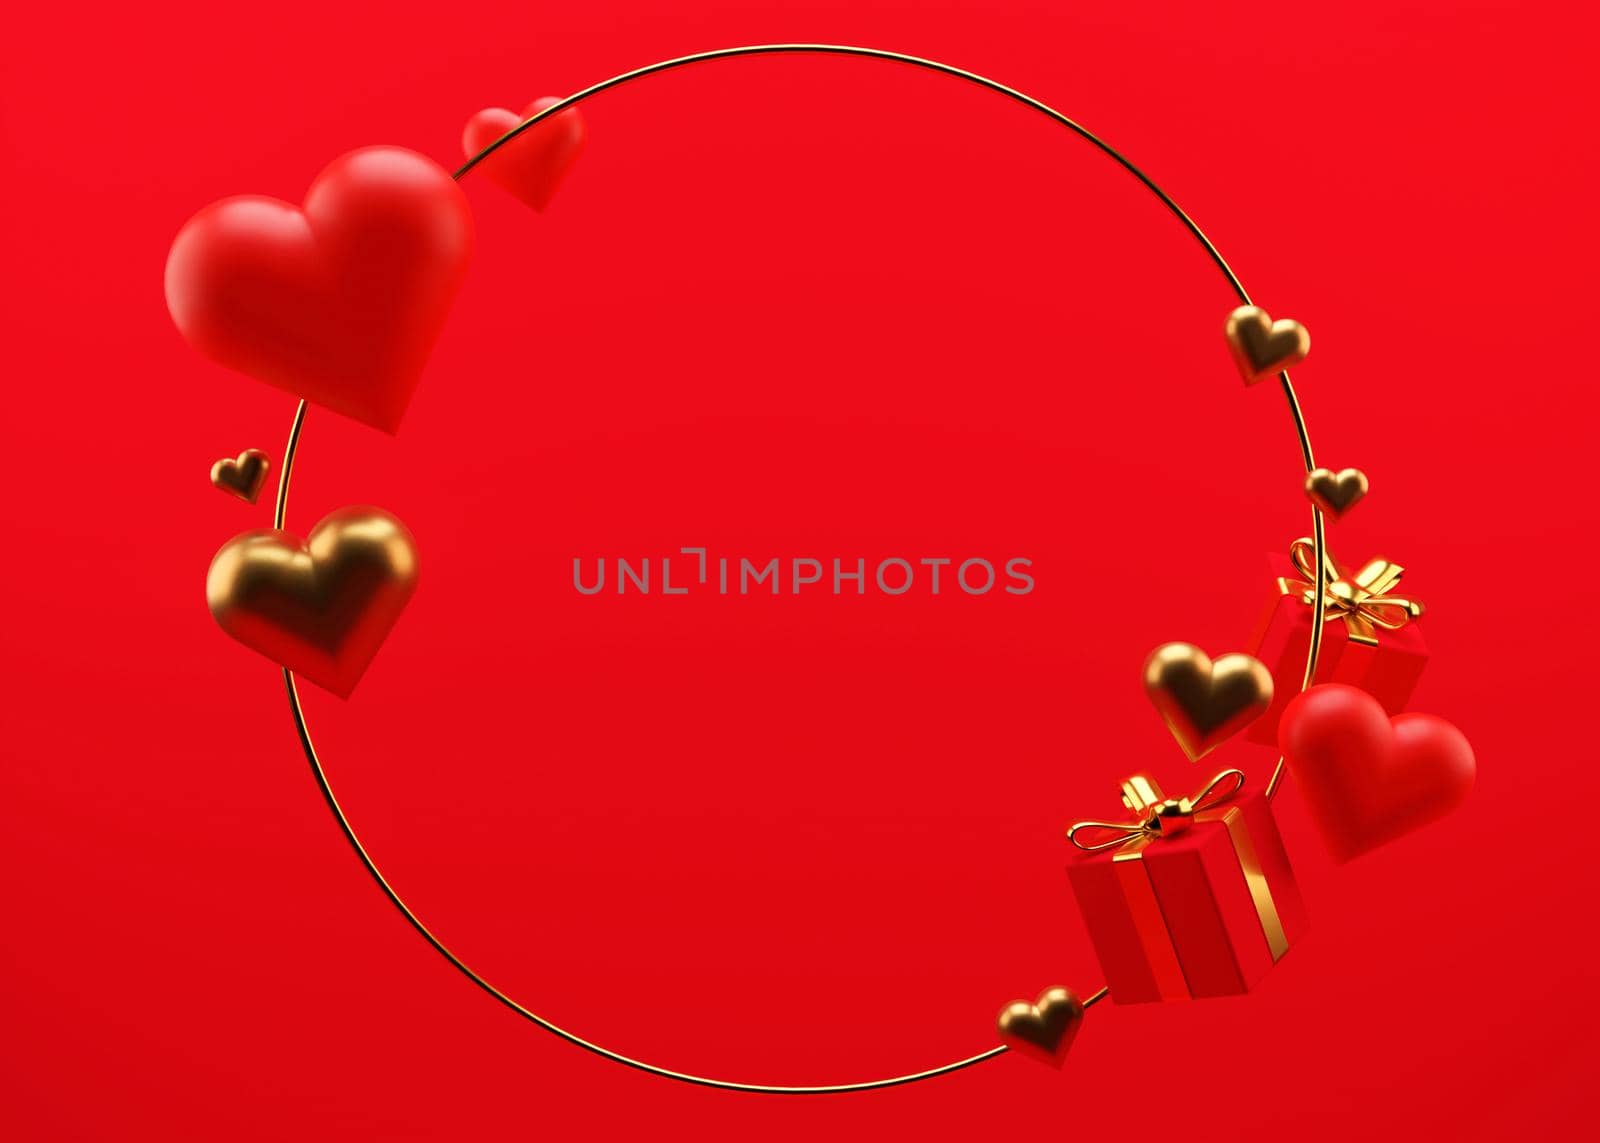 Red Valentine's Day background with free space for text, copy space. Postcard, greeting card design with red and golden hearts and gifts. 3D illustration. Love